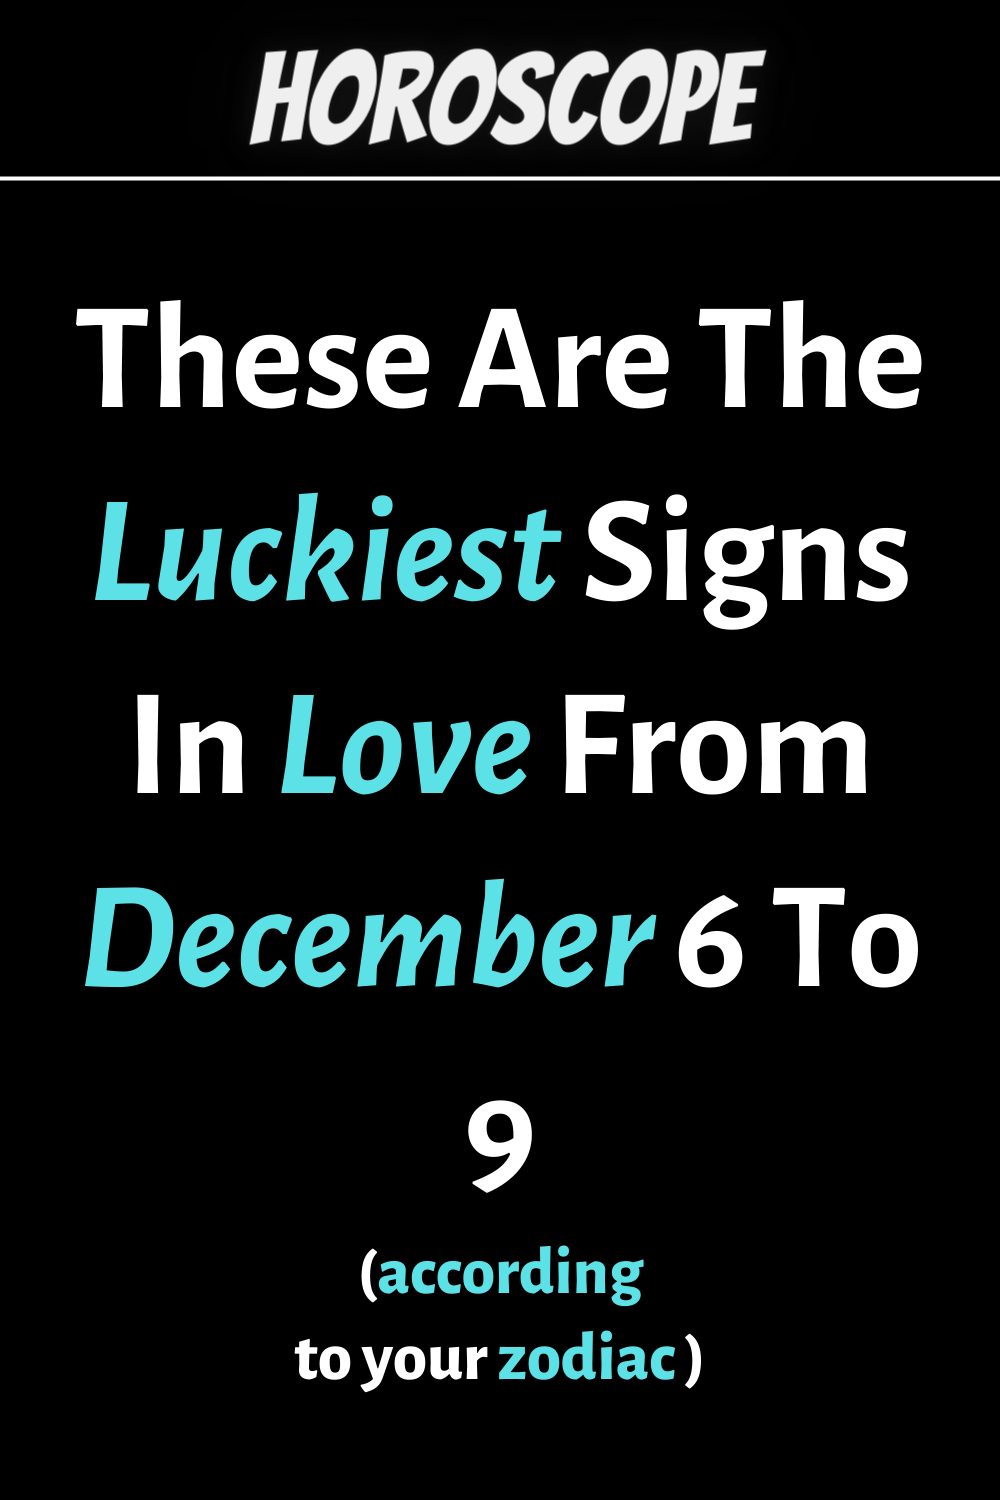 These Are The Luckiest Signs In Love From December 6 To 9 According To ...